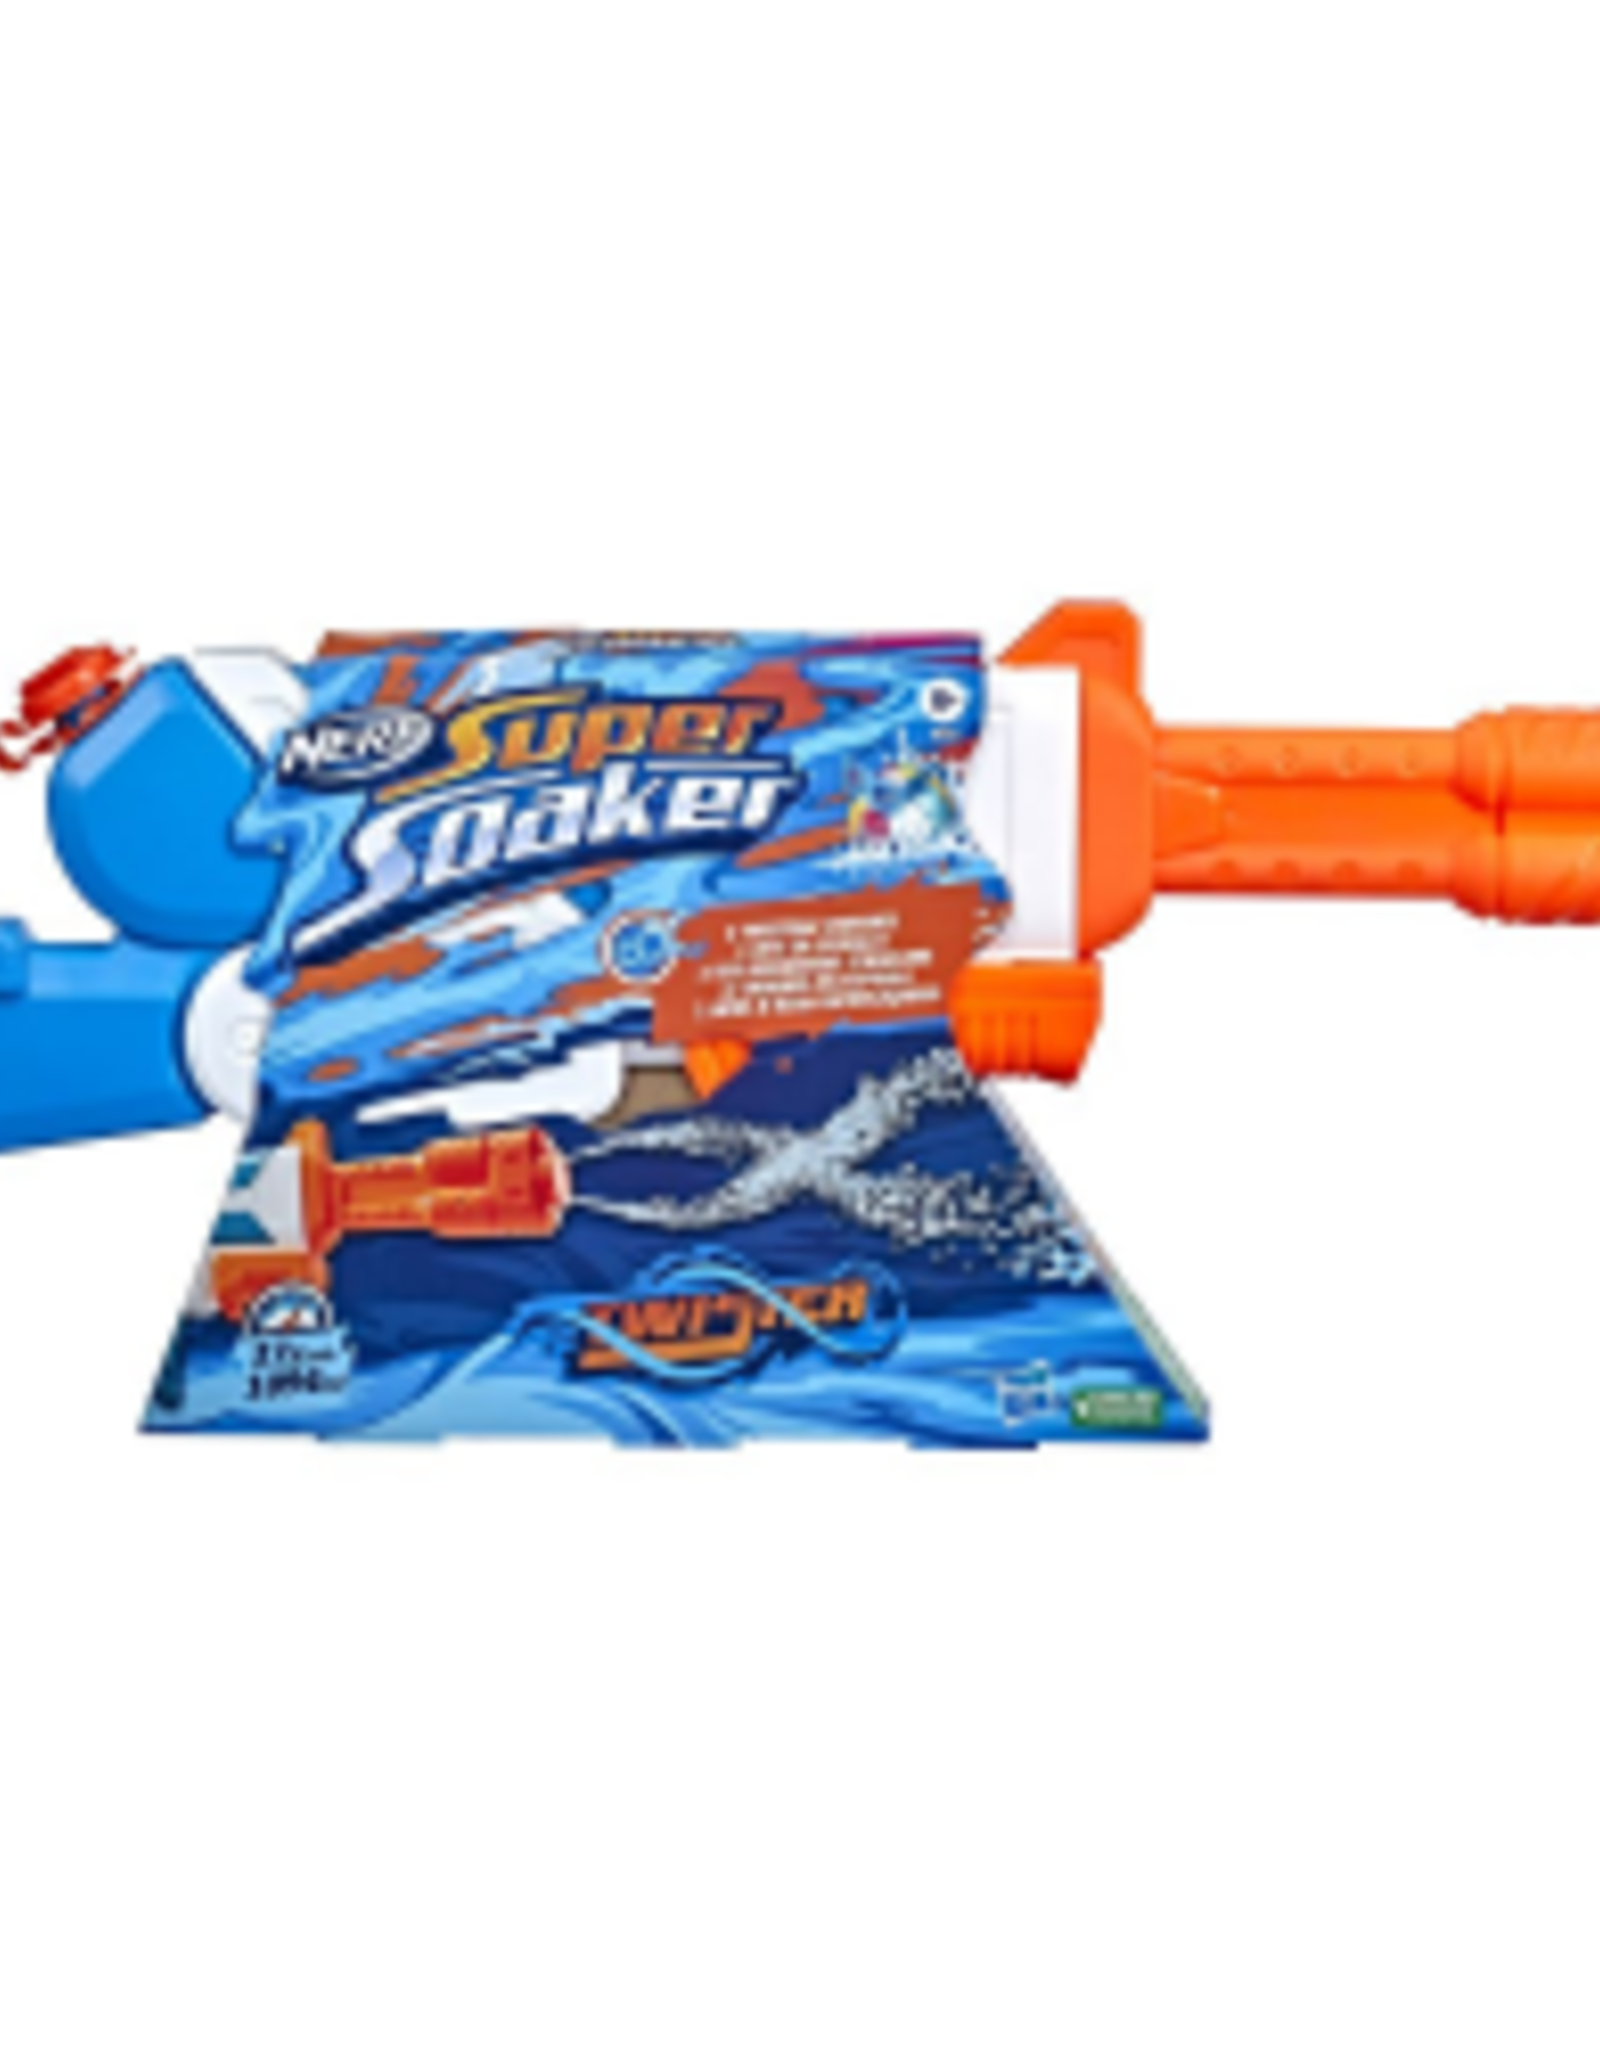 Nerf Nerf Supersoaker Twister